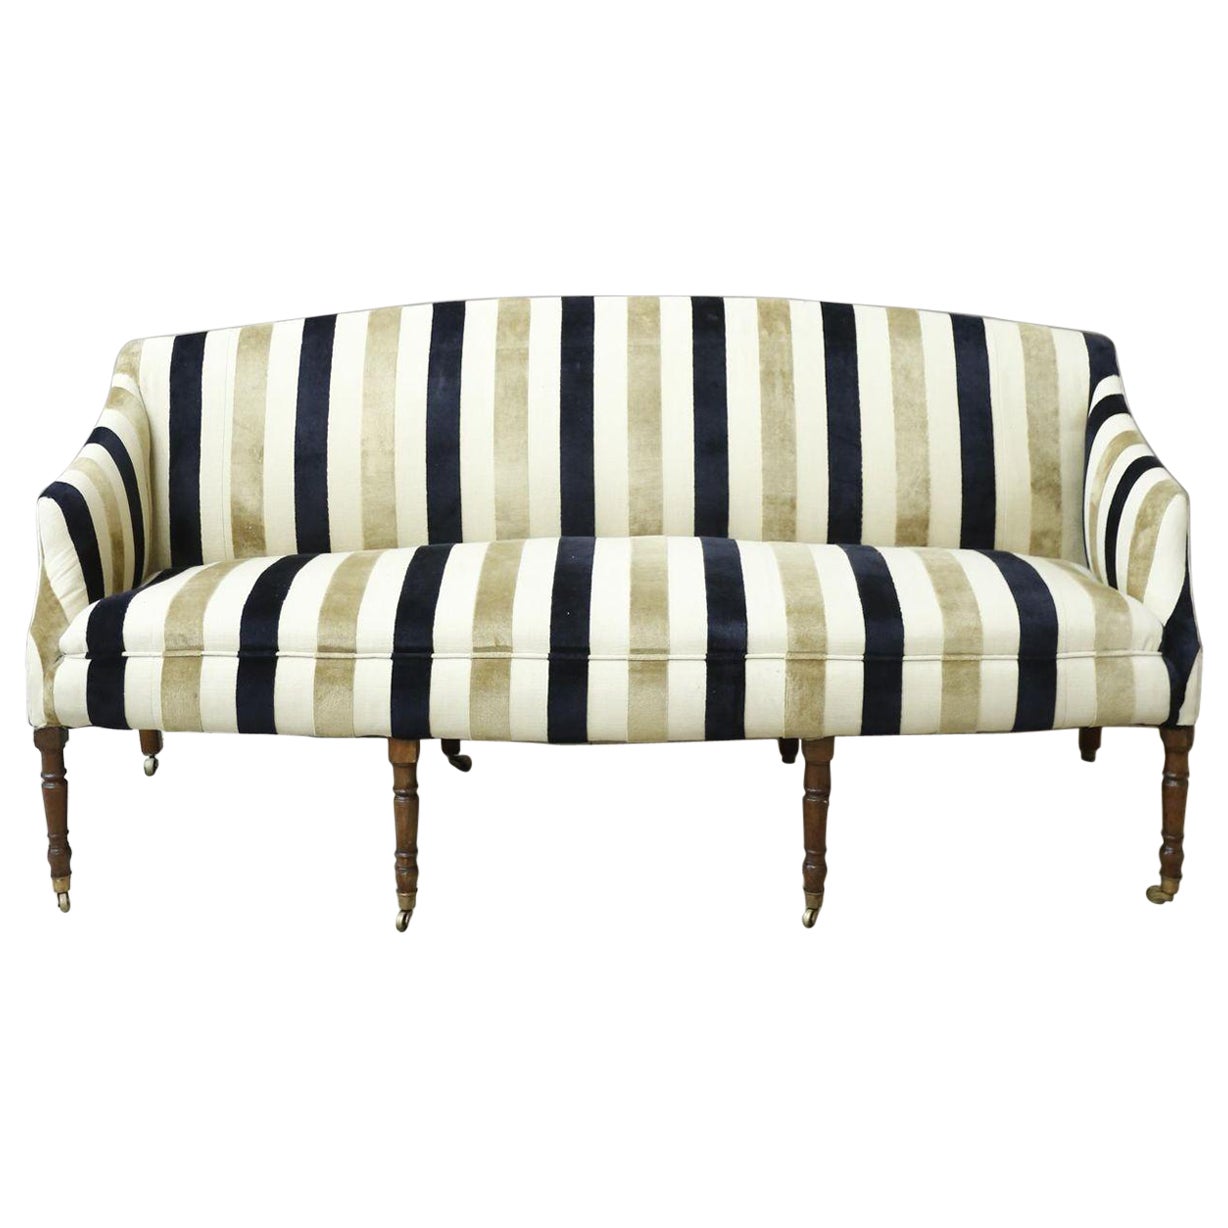 Georgian country house sofa with shaped arms